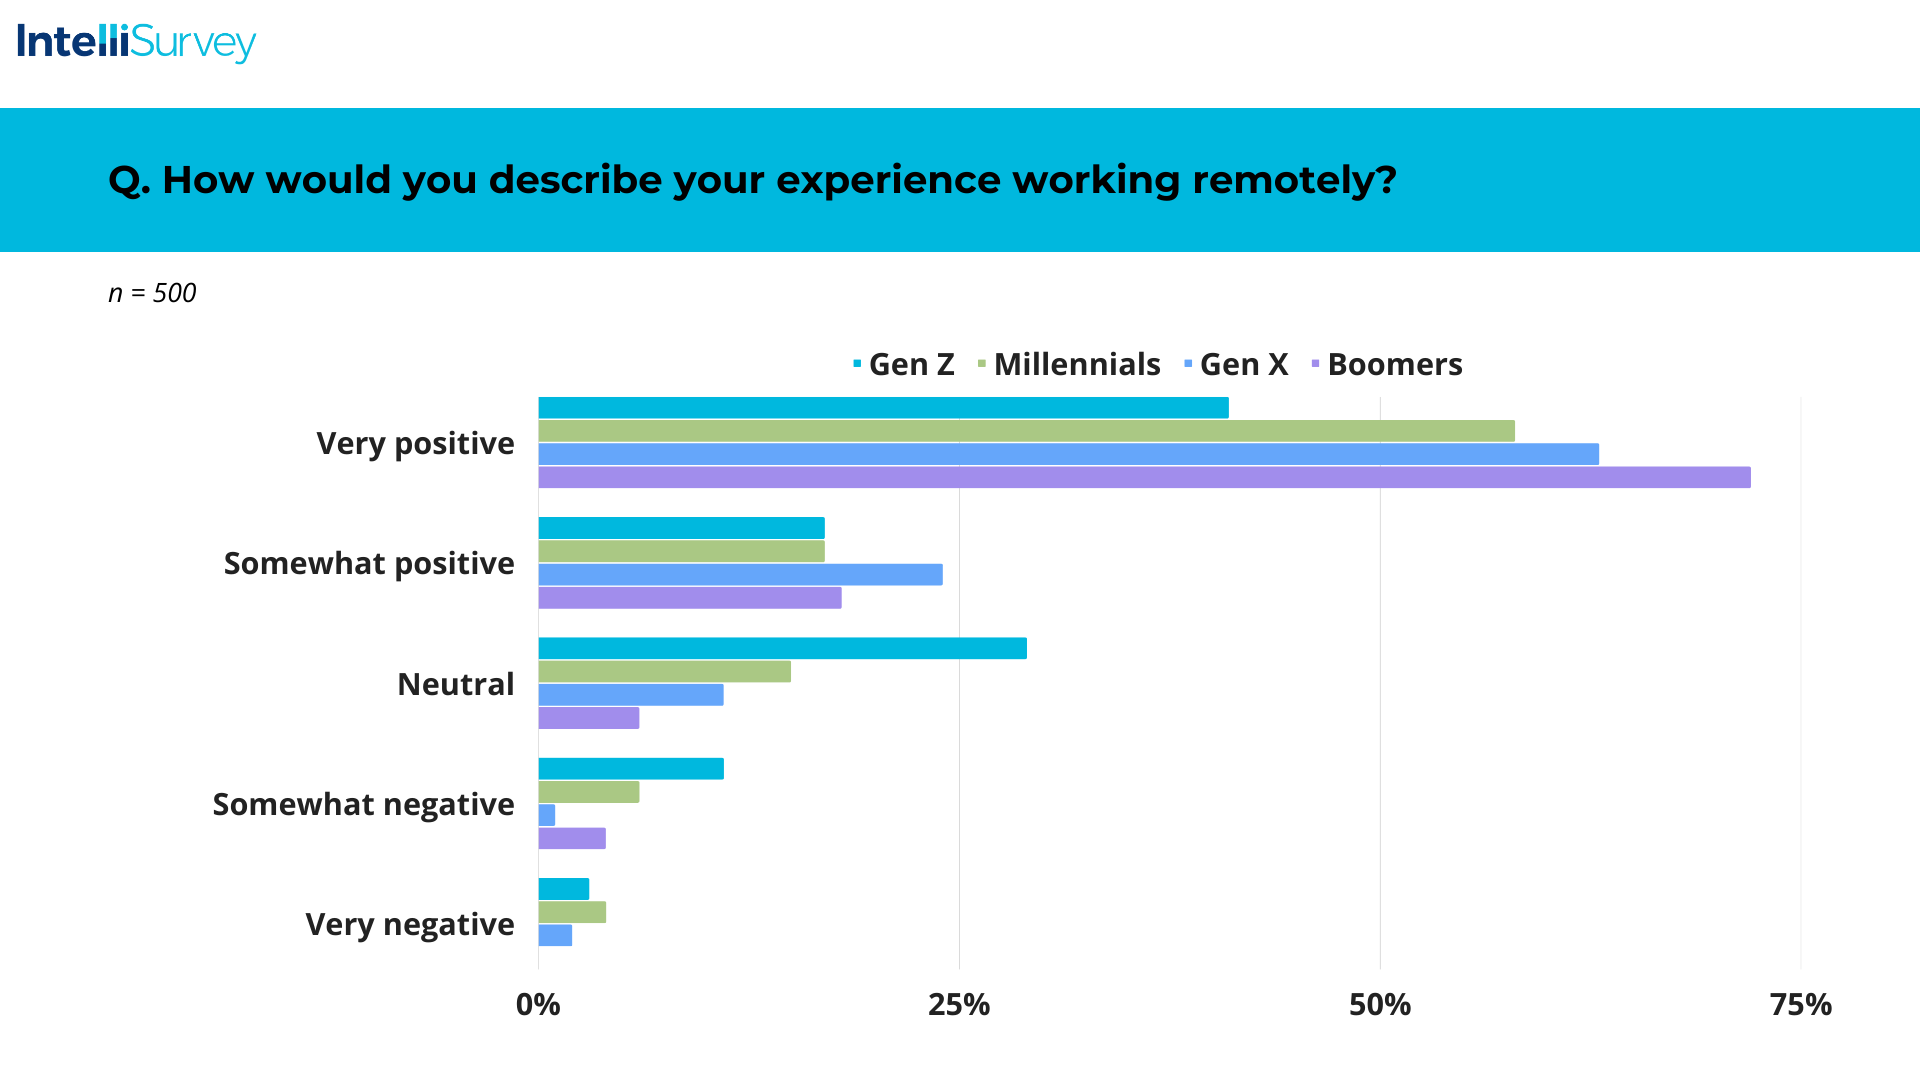 Chart of Gen Z, Millennials, Gen X, and Boomers' experience working remotely.